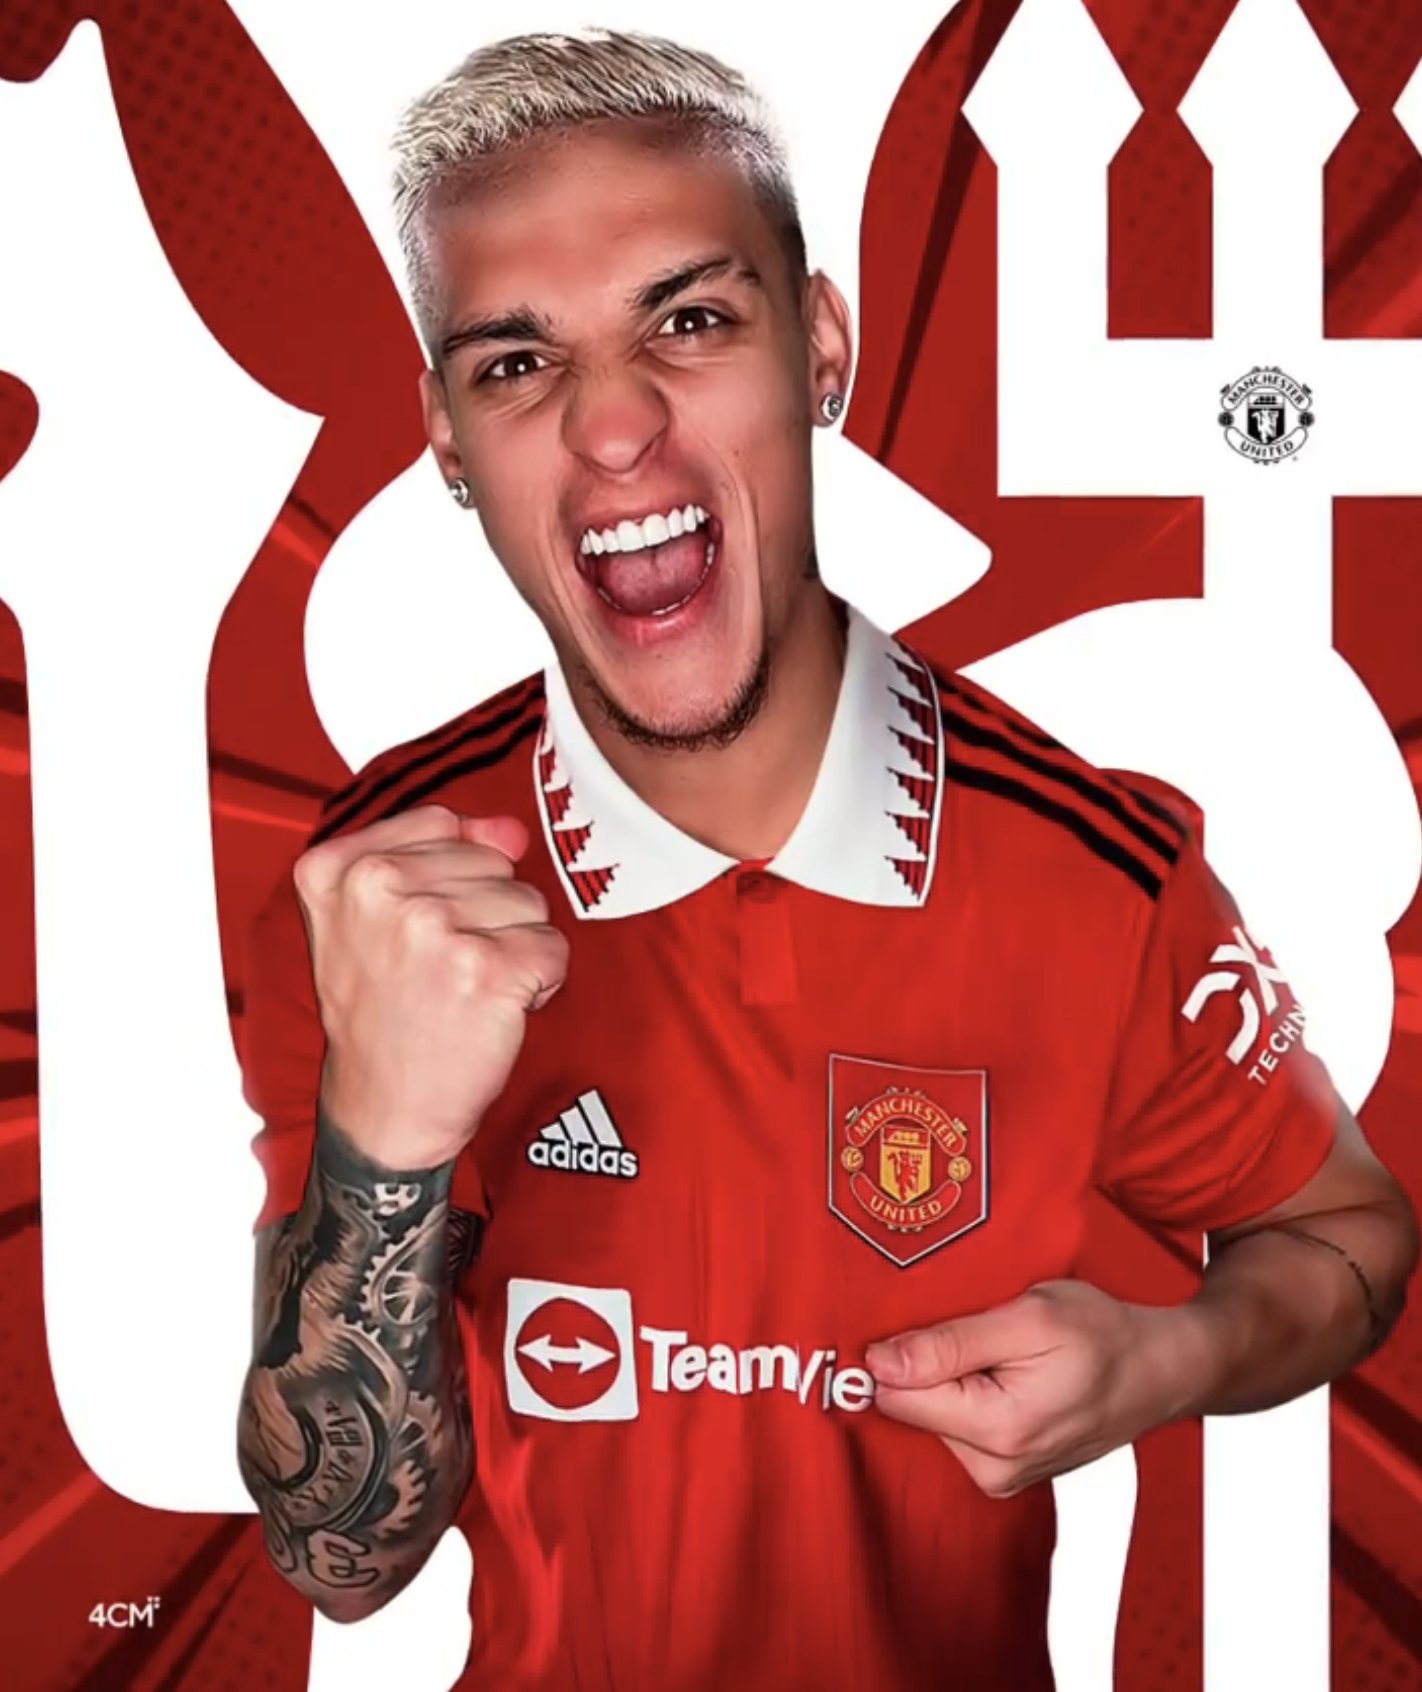 Photos Antony in Man Utd kit after completing £86m move